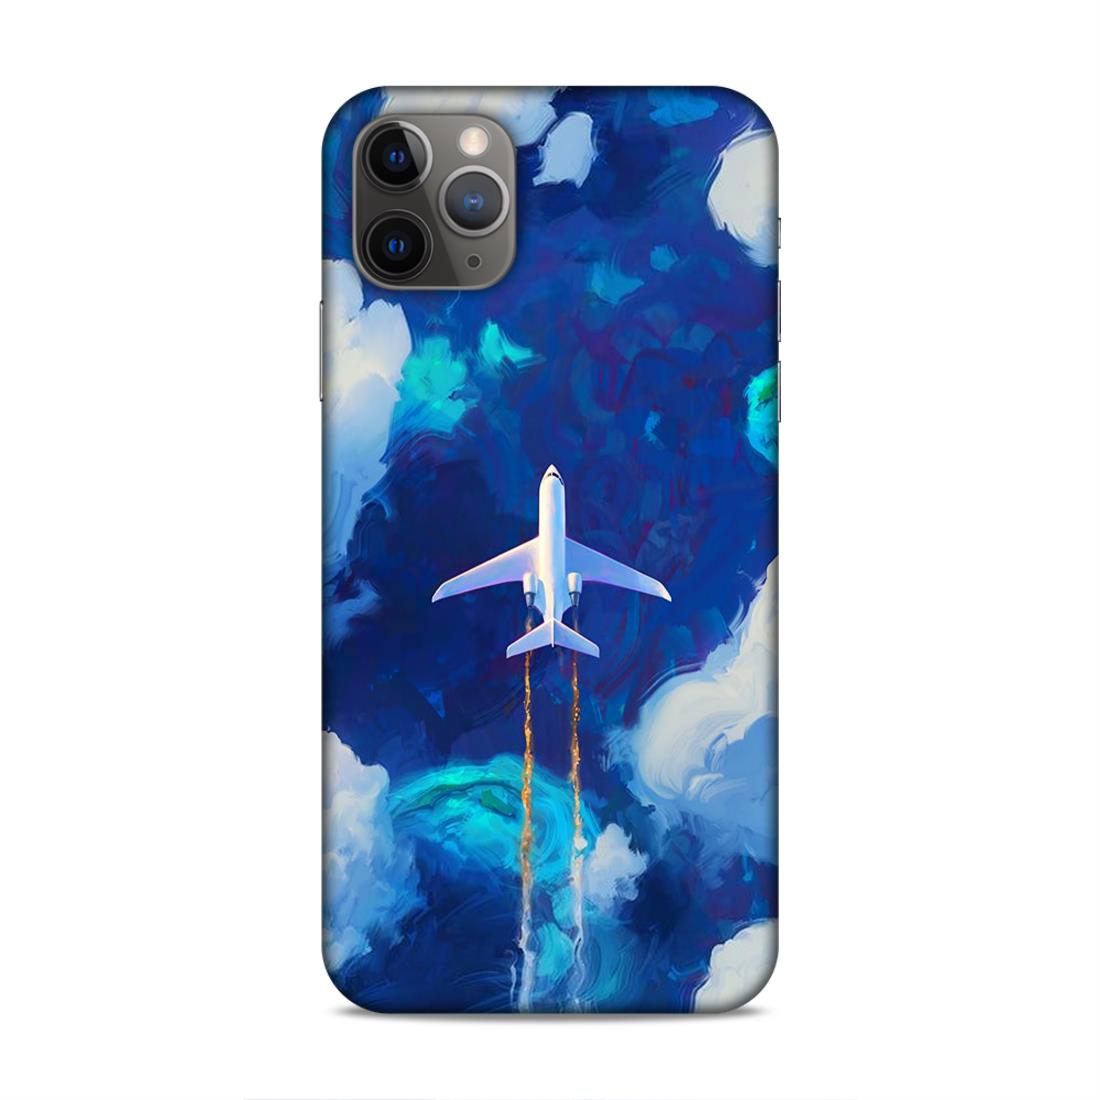 Aeroplane In The Sky Hard Back Case For Apple iPhone 11 Pro Max